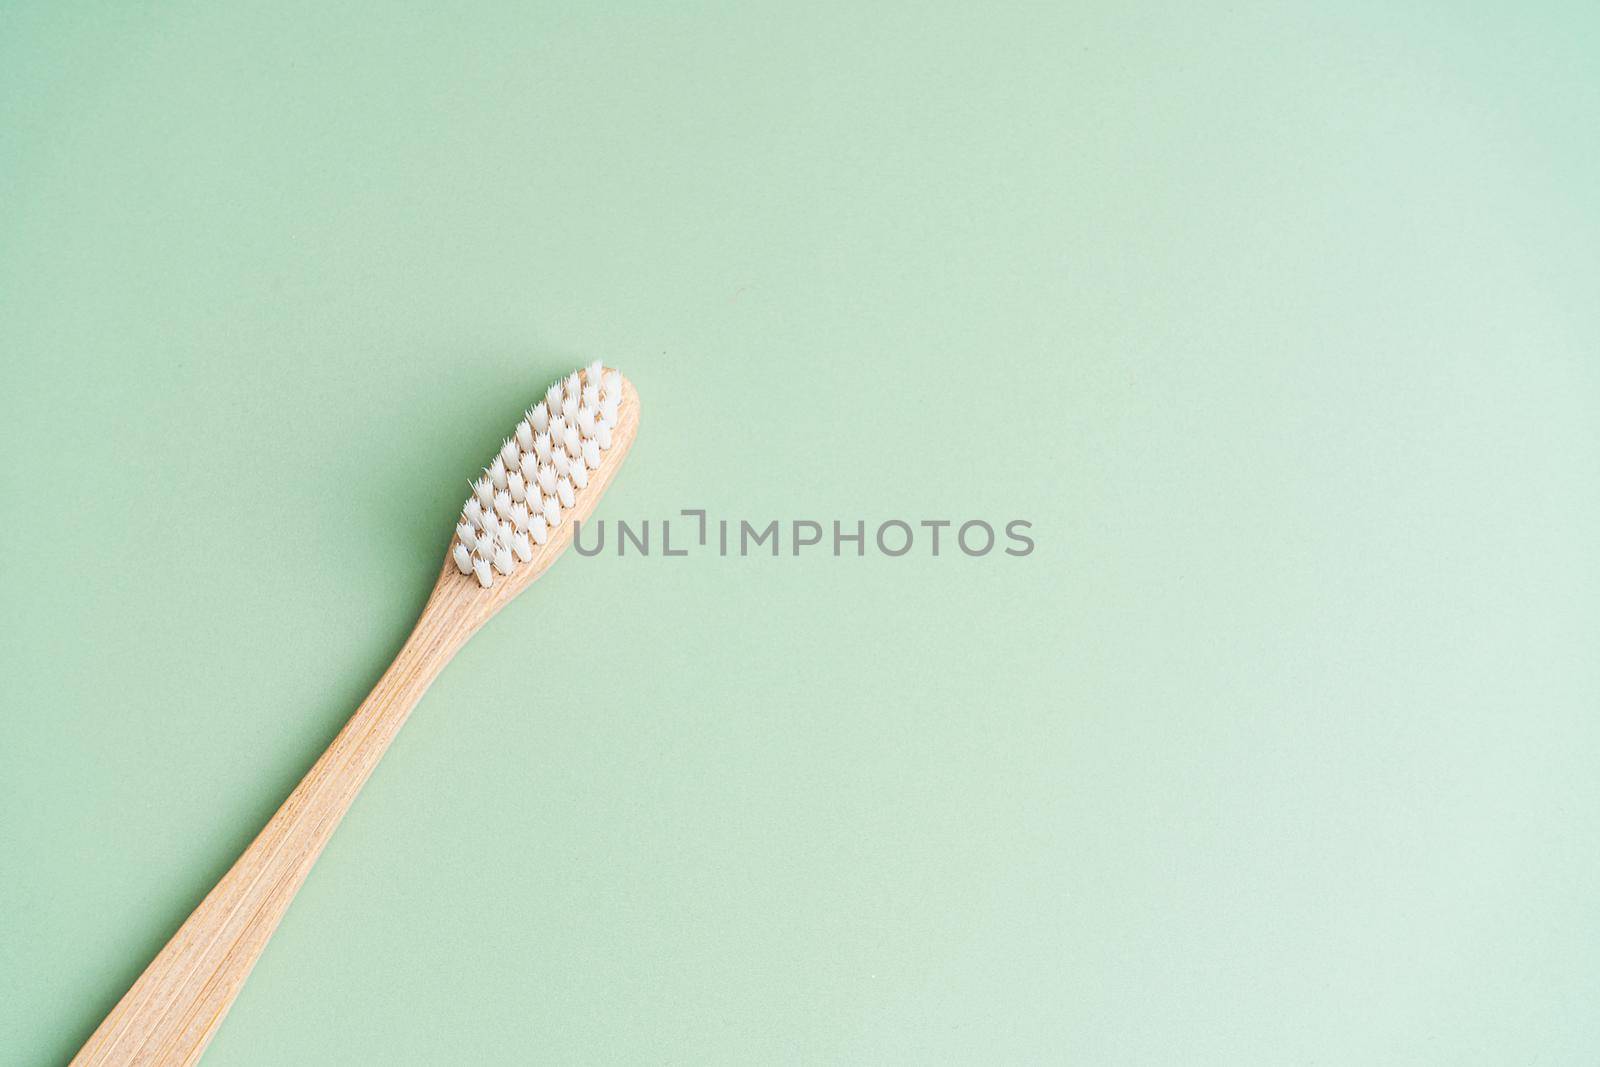 Eco friendly dental health antibacterial bamboo wood toothbrush on green background by Try_my_best